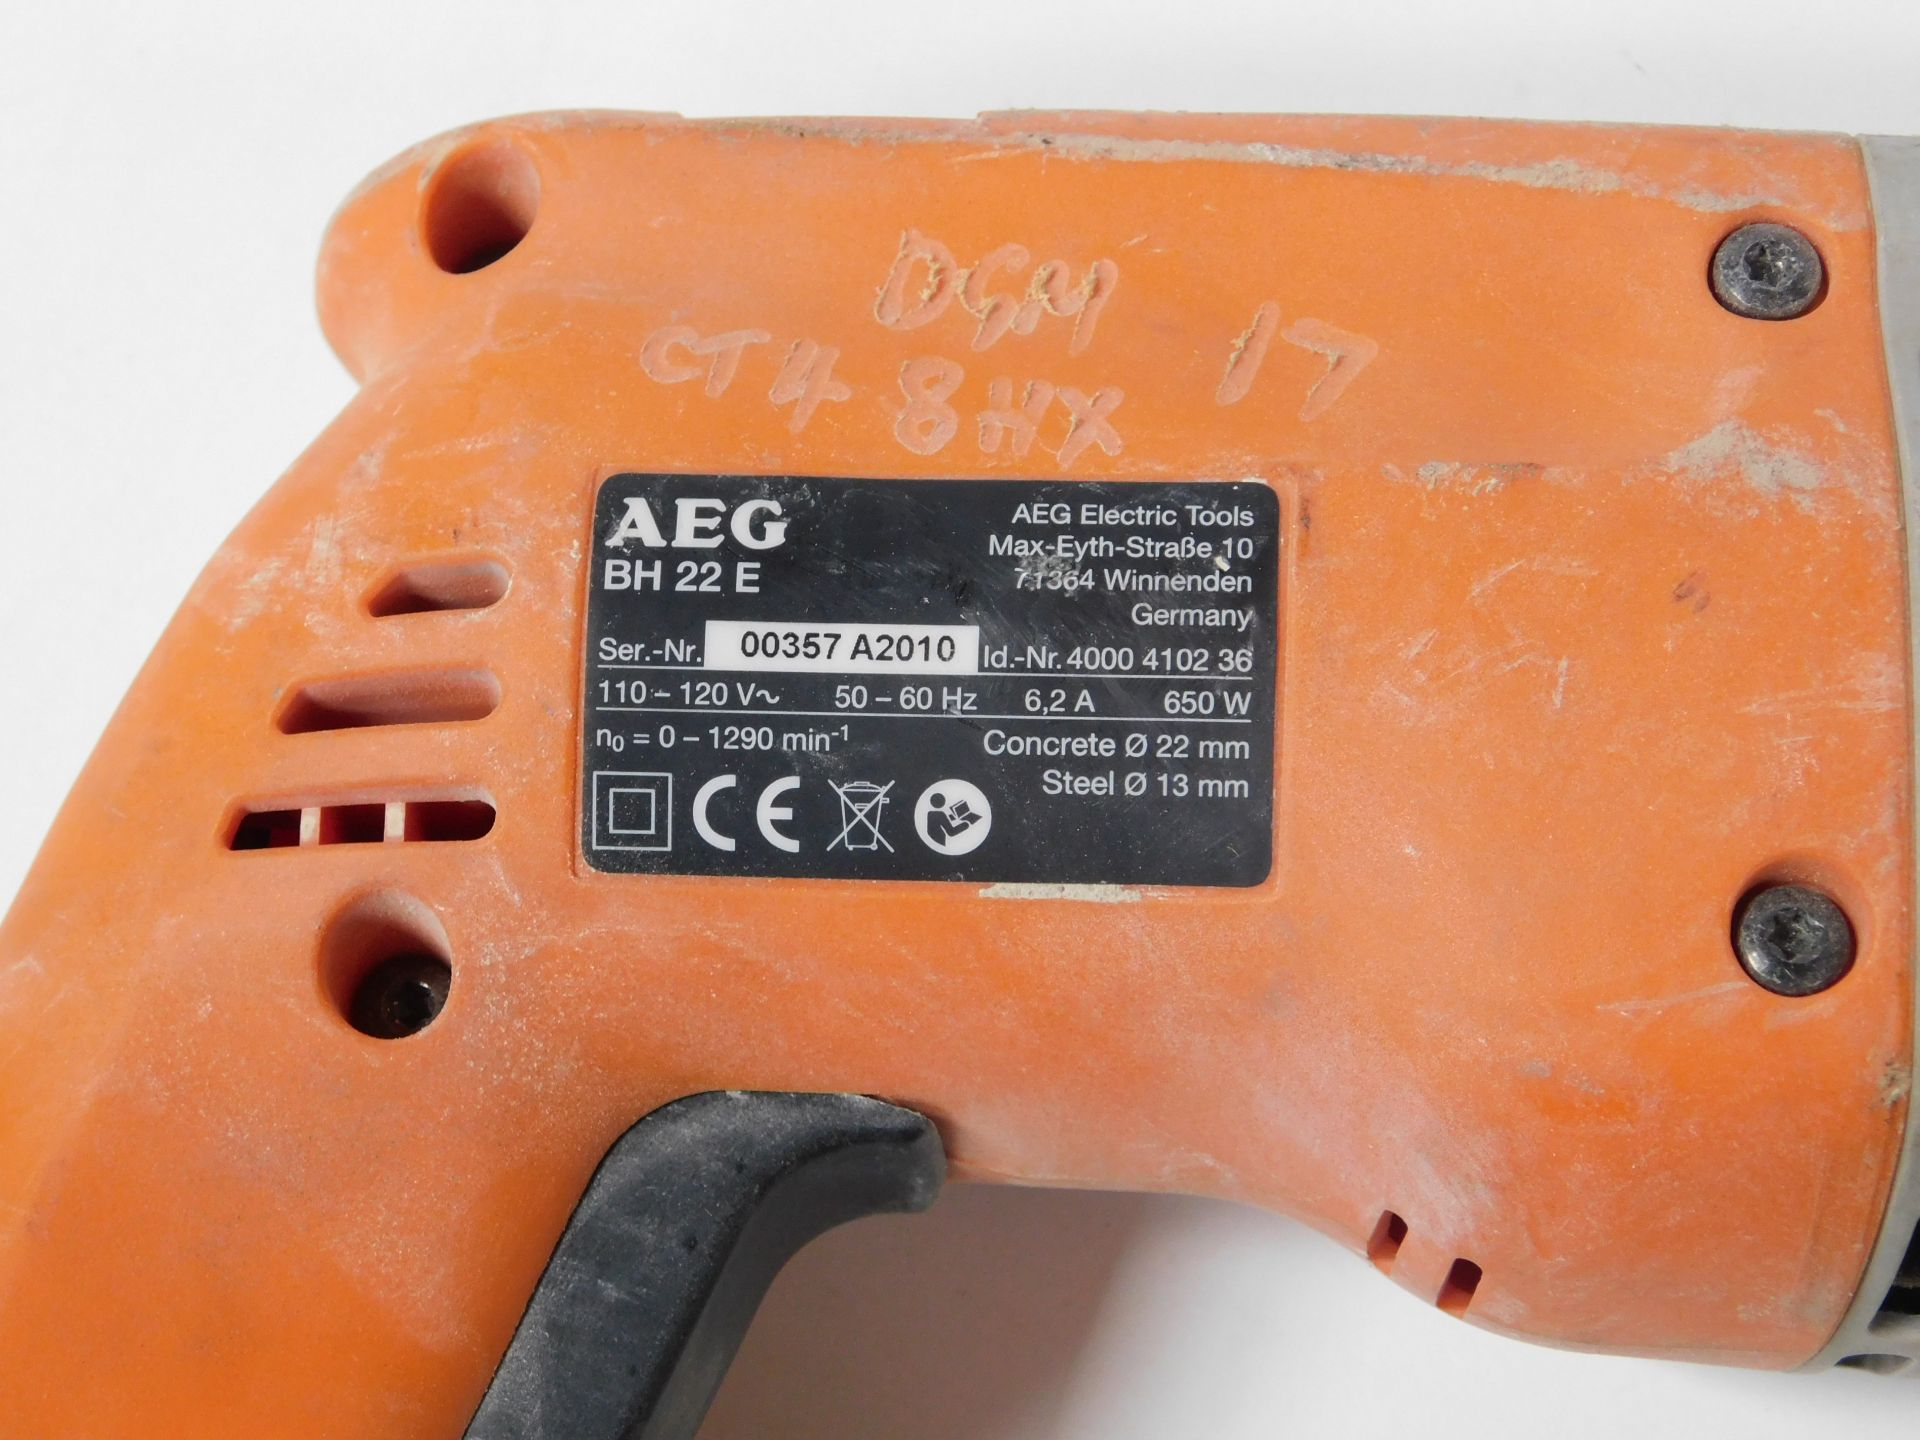 AEG BH 22 E Hammer Drill, 110v (Location: Brentwood - See General Notes for Details) - Image 3 of 3